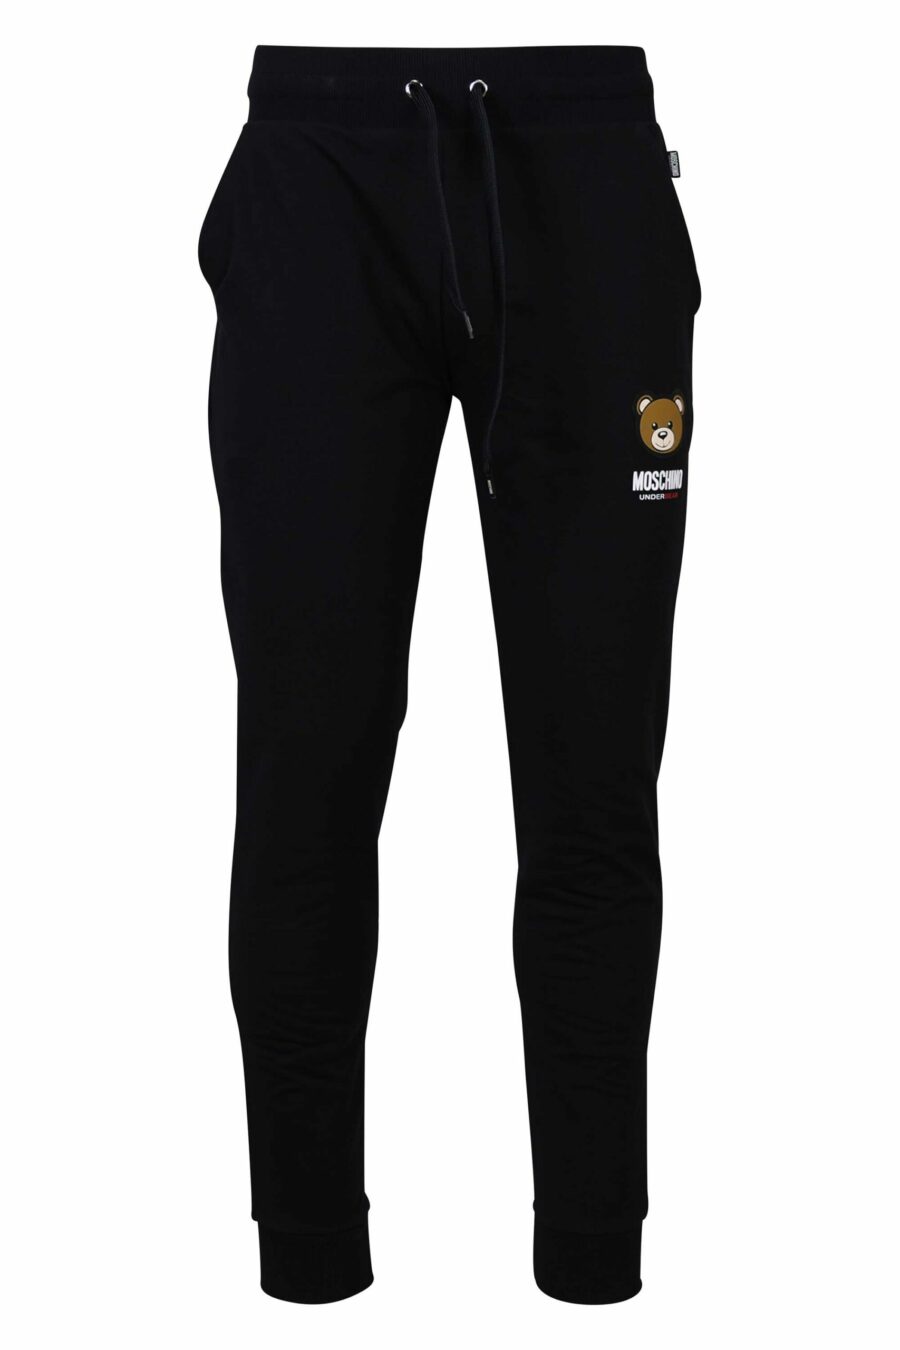 Tracksuit bottoms black with "underbear" bear logo patch - 667113019949 scaled